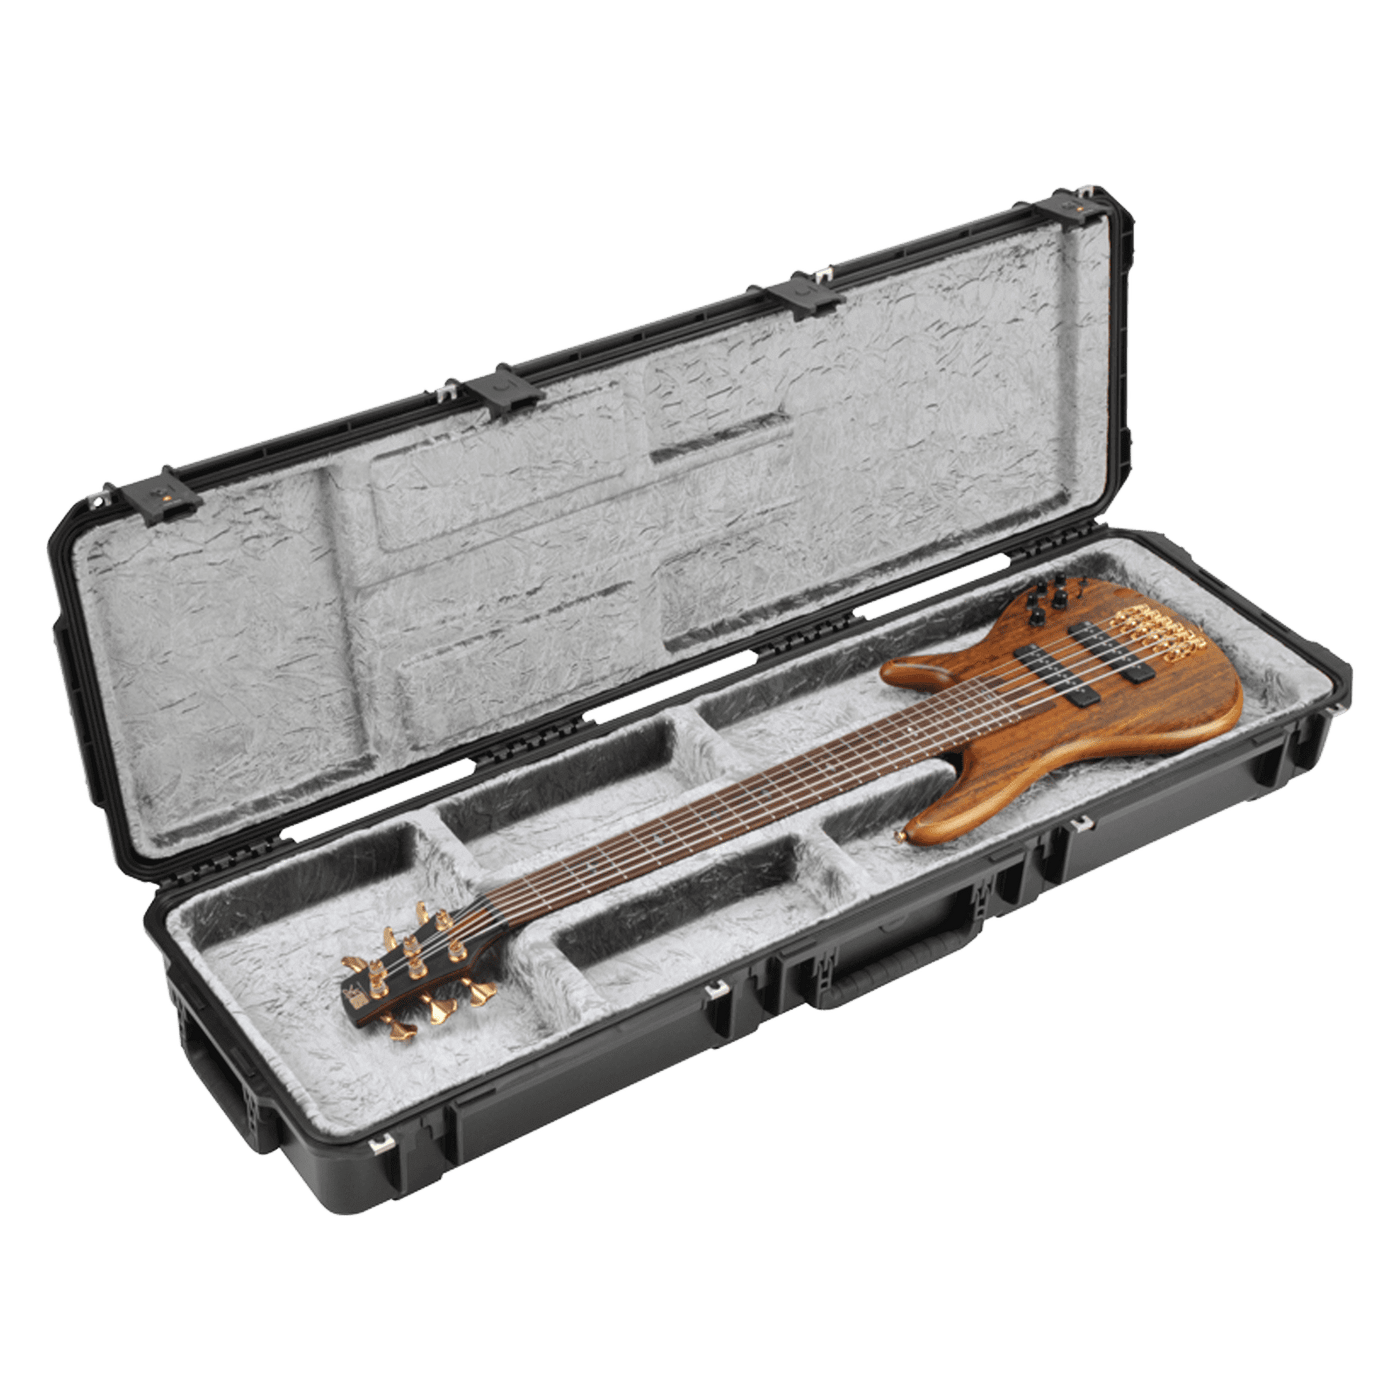 SKB iSeries Waterproof ATA (Open Cavity Bass Case) - SKB revolutionized the industry with the first INJECTION molded guitar case! To accommodate a wider variety of body shapes they have developed the iSeries 5014-OP Open Cavity Electric Bass case.iSeries